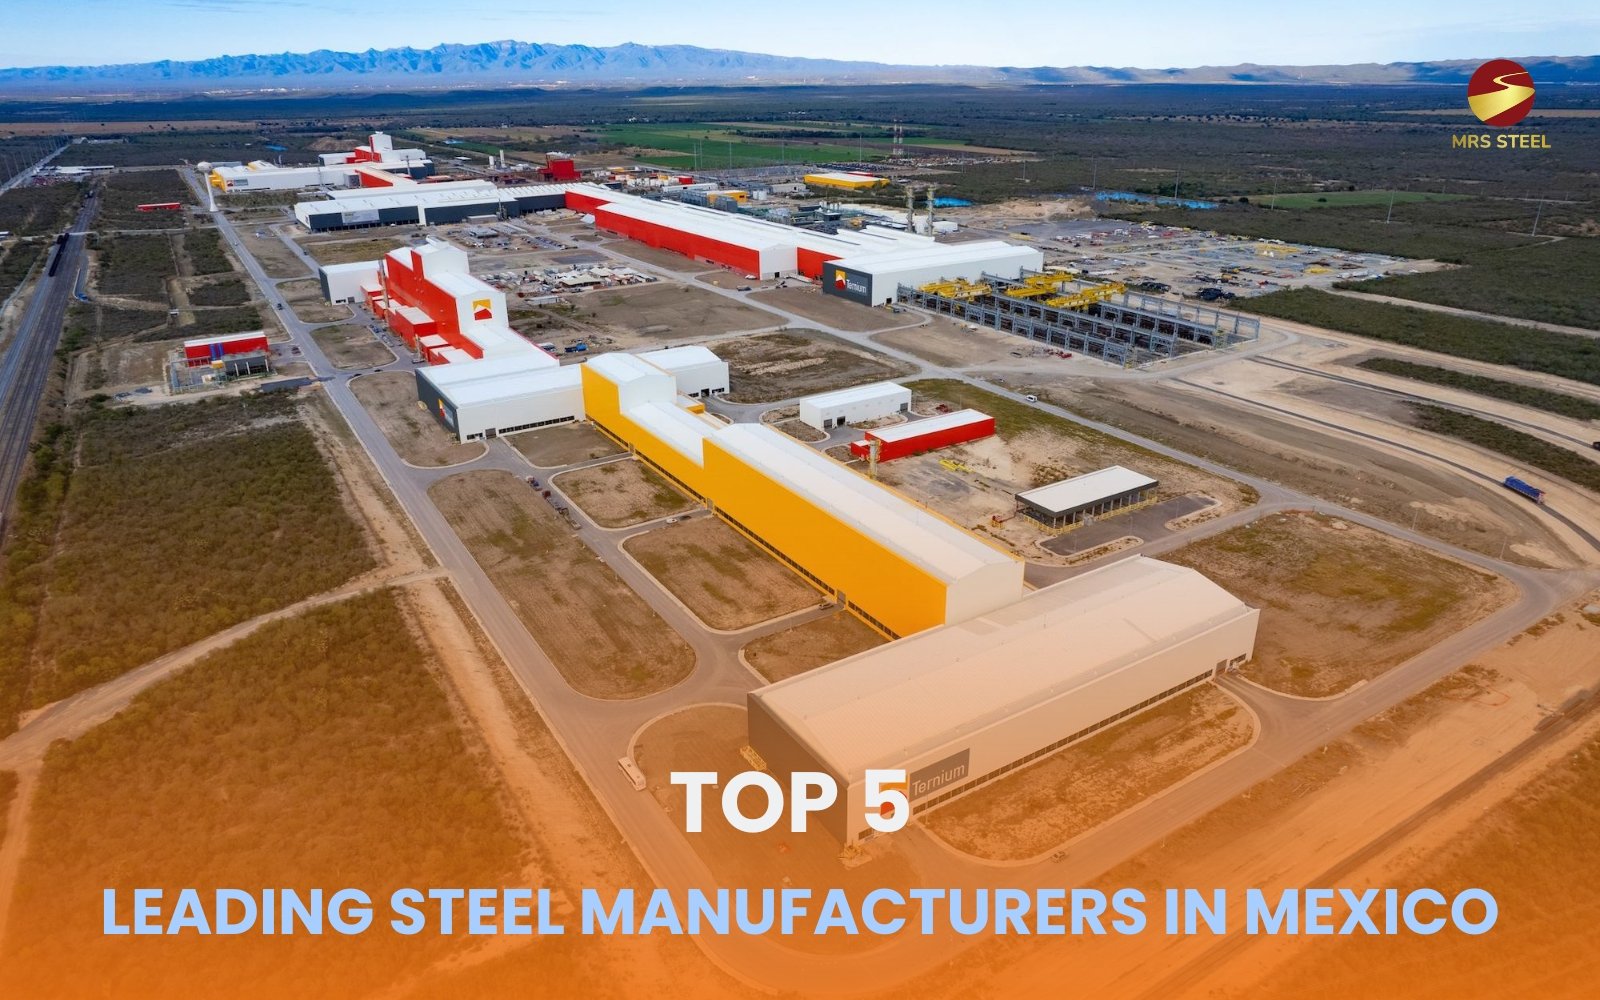 Top 5 leading steel manufacturers in Mexico